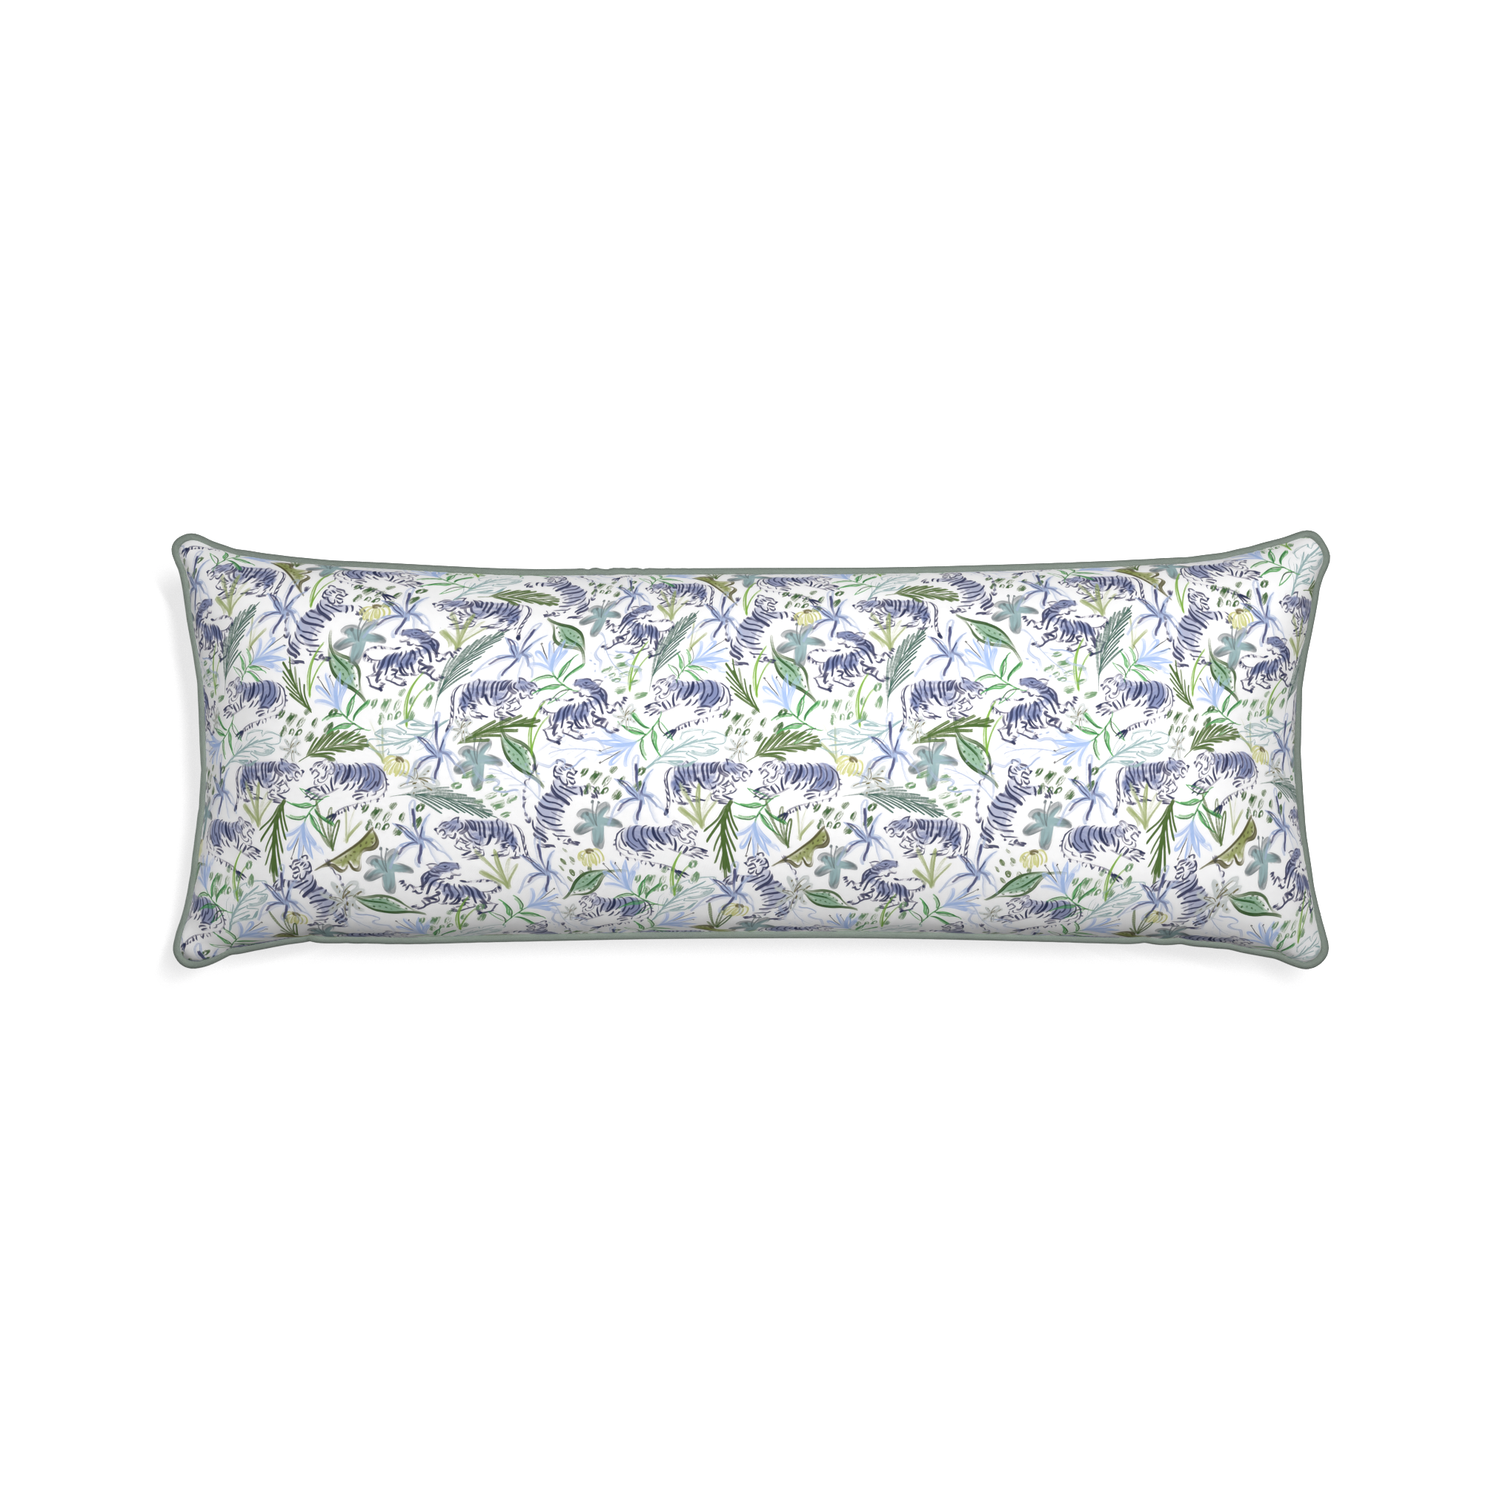 Xl-lumbar frida green custom green tigerpillow with sage piping on white background